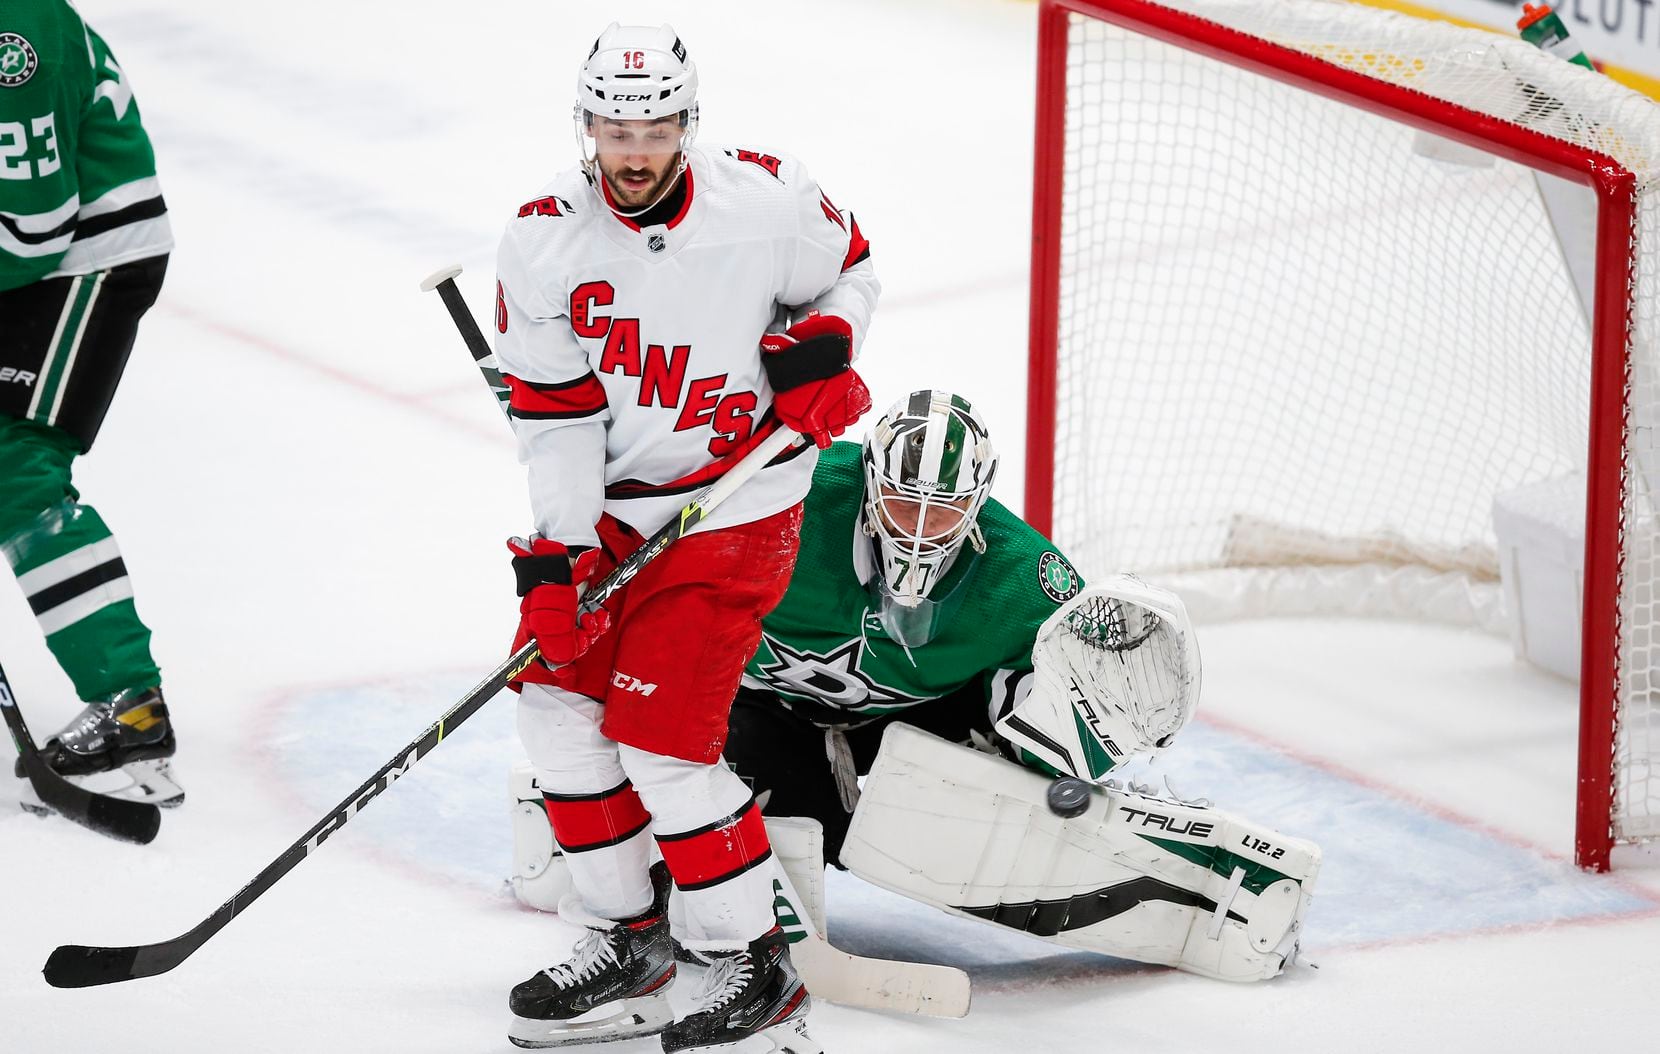 Carolina Hurricanes forward Vincent Trocheck (16) screens a shot as Dallas Stars goaltender Braden Holtby (70) makes the save during the first period of an NHL hockey game in Dallas, Tuesday, November 30, 2021. (Brandon Wade/Special Contributor)